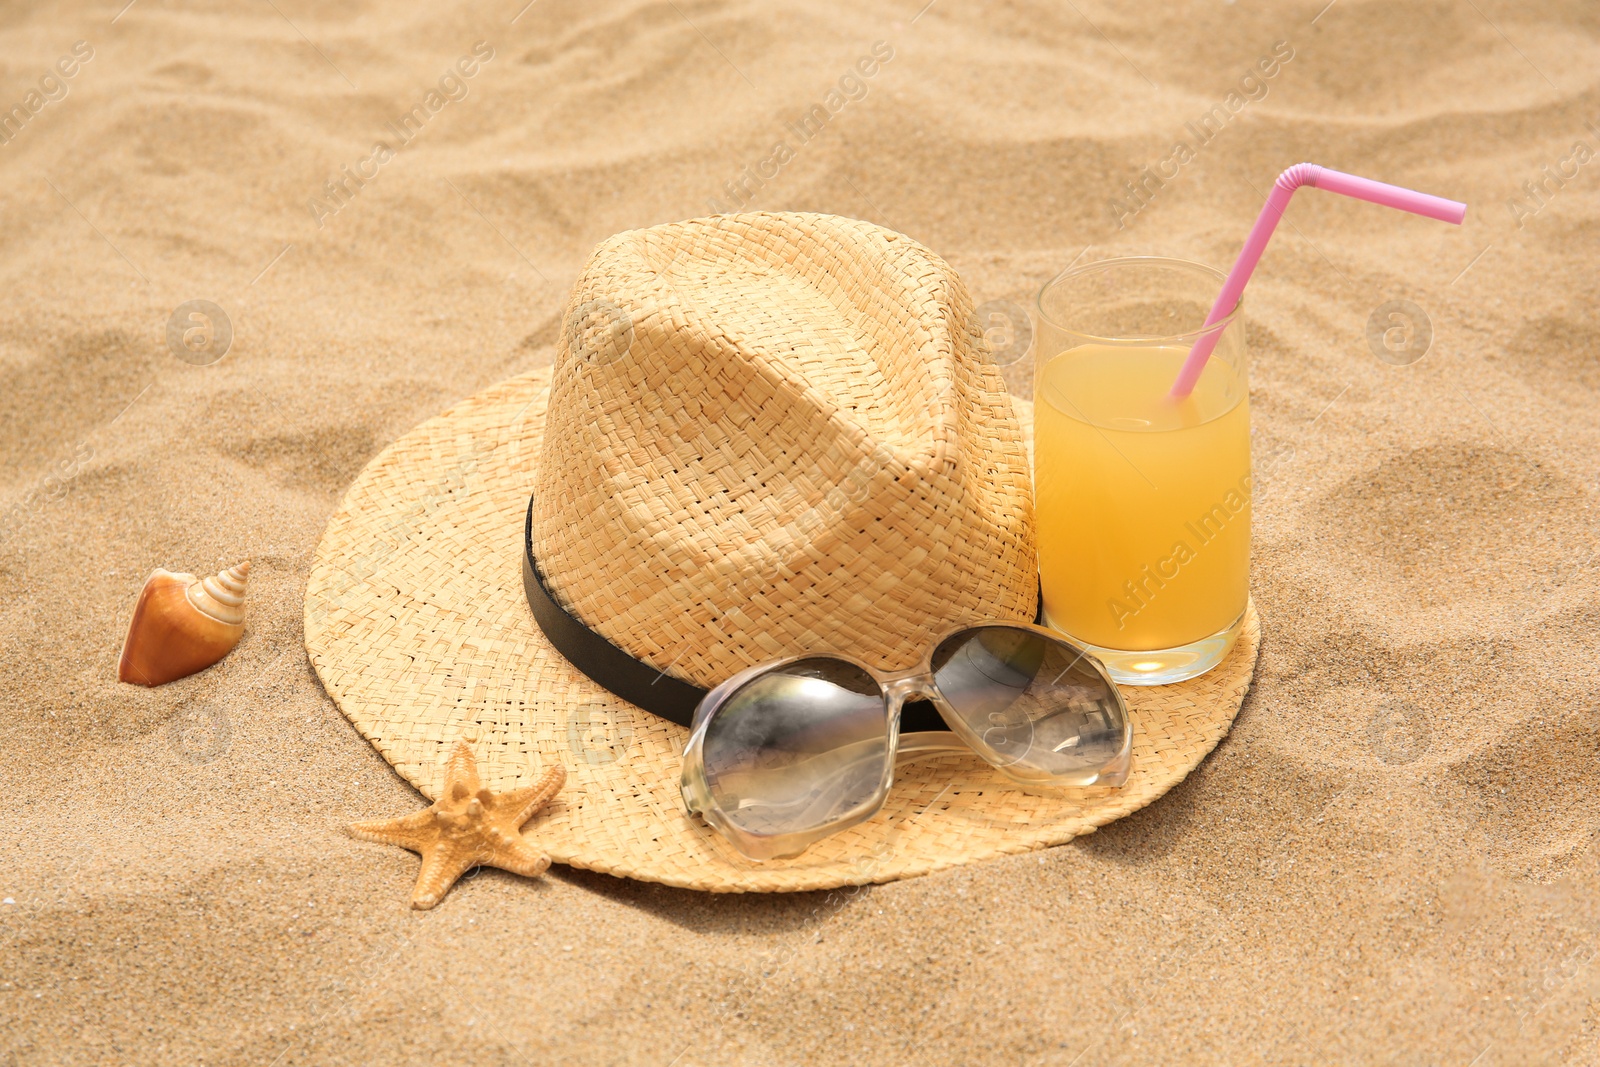 Photo of Straw hat, sunglasses and refreshing drink on sand. Beach accessories